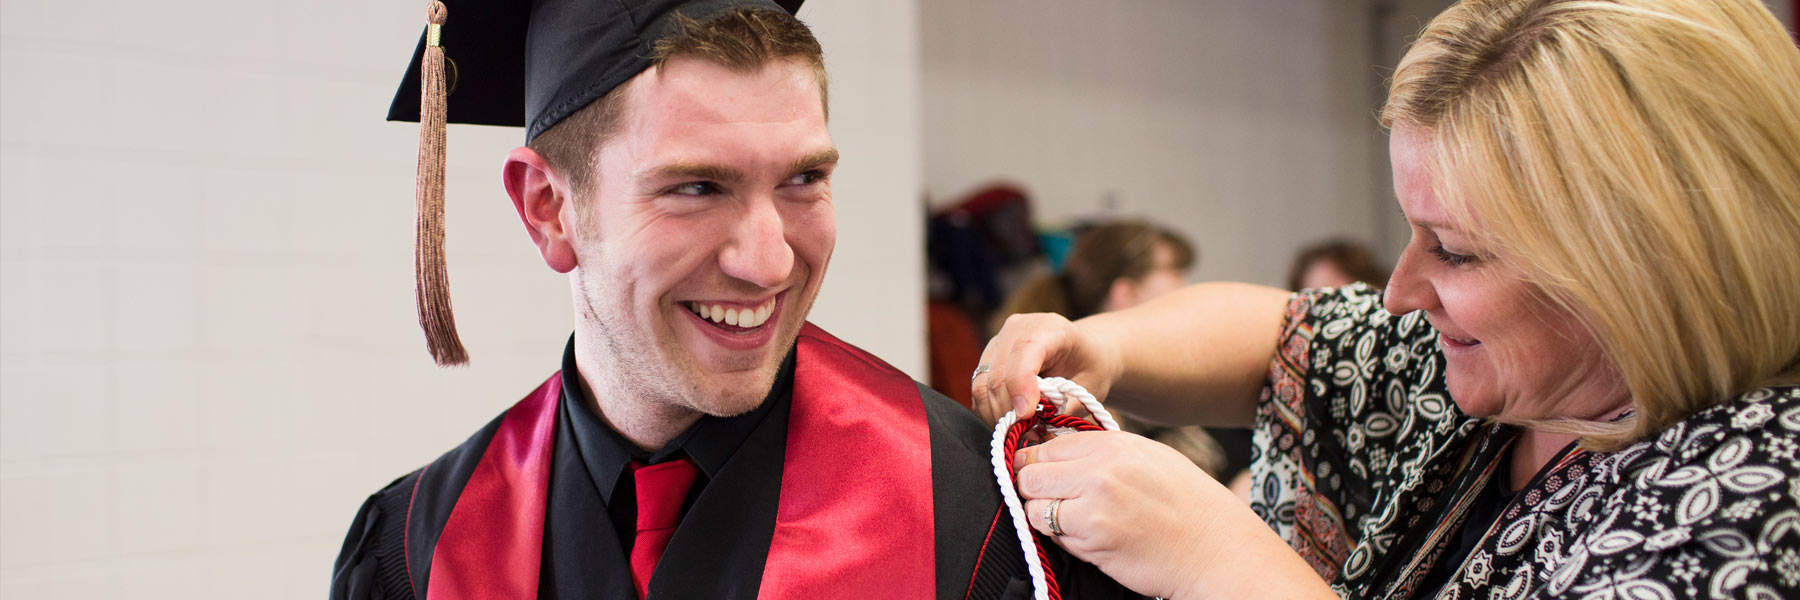 A woman helps a business graduate pin his honor cords to his graduation robe